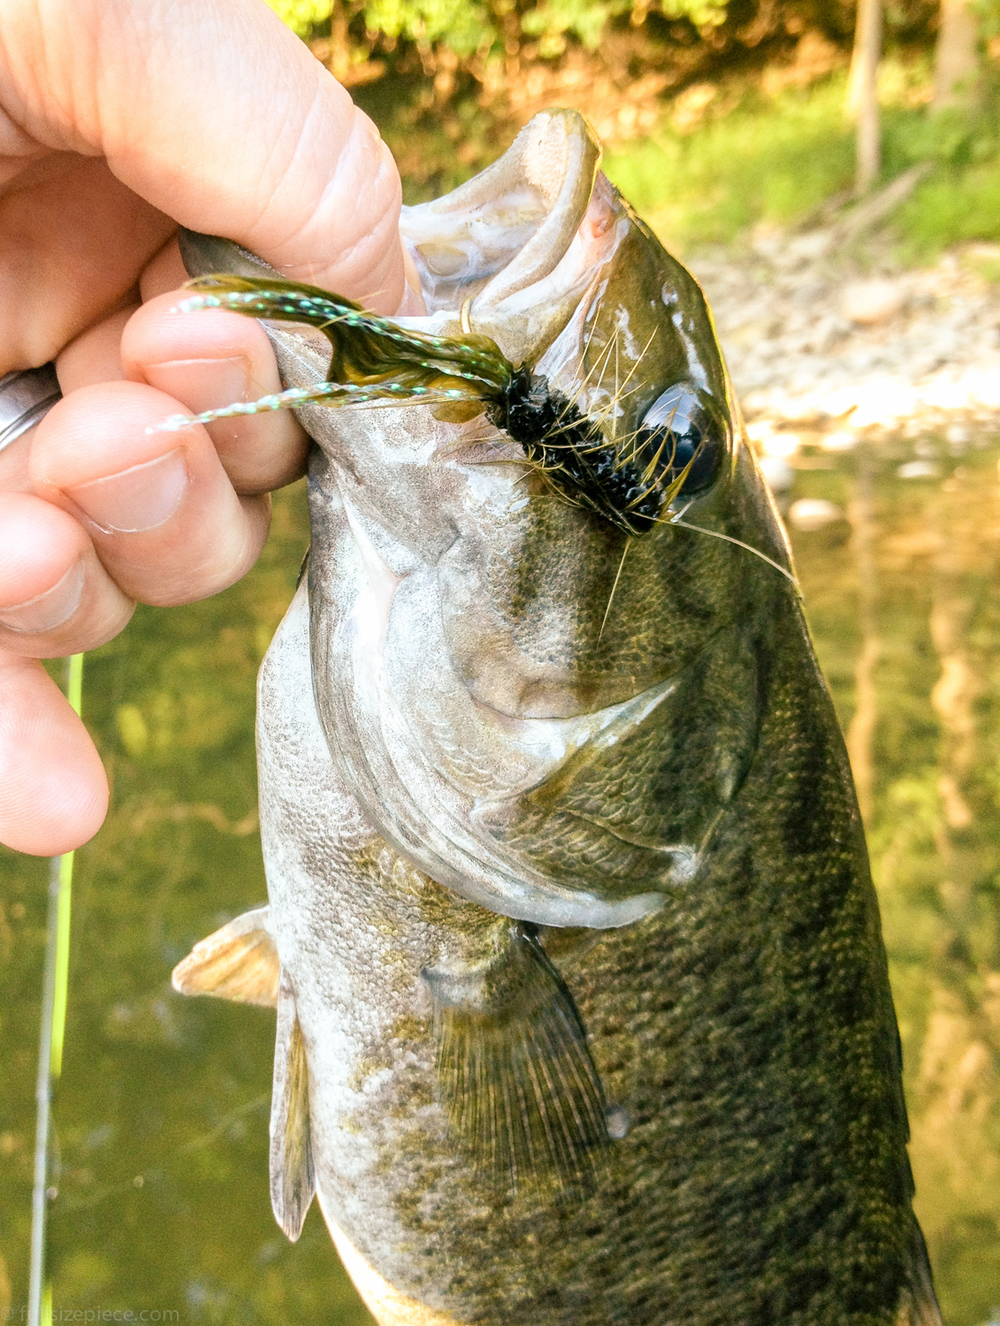 First river smallmouth on a self-tied fly.